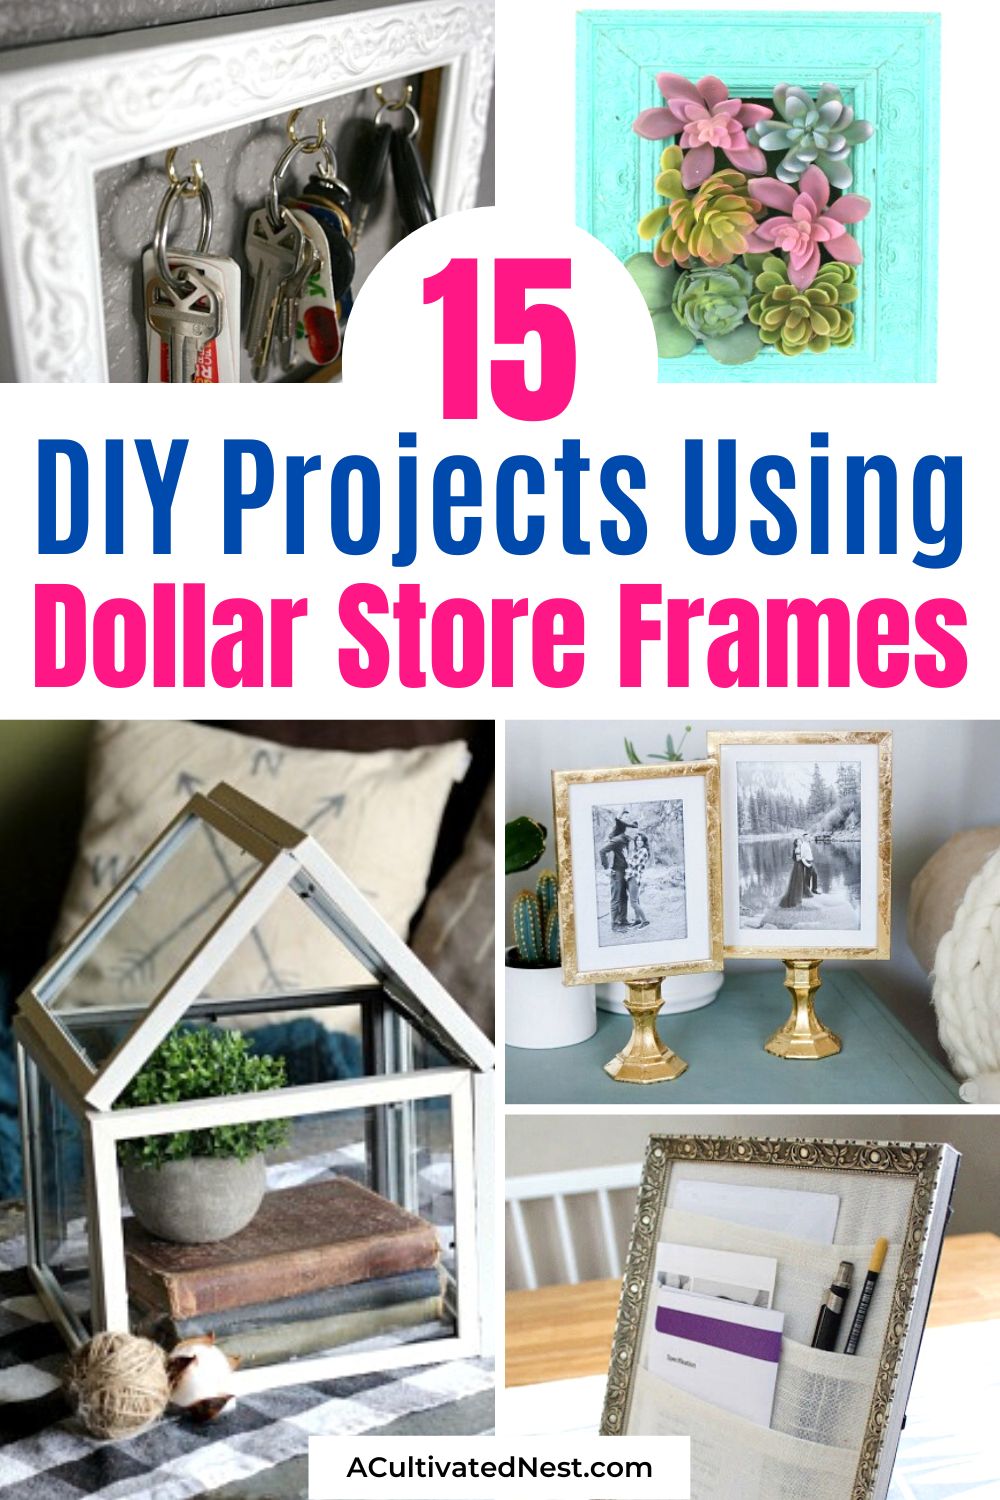 15 DIY Home Décor Projects with Dollar Store Frames- If you want to update your home's décor easily on a budget, then you'll love these DIY décor projects that use dollar store frames! | dollar store décor ideas, #DIY #diyProjects #dollarStoreDIY #dollarStoreCrafts #ACultivatedNest